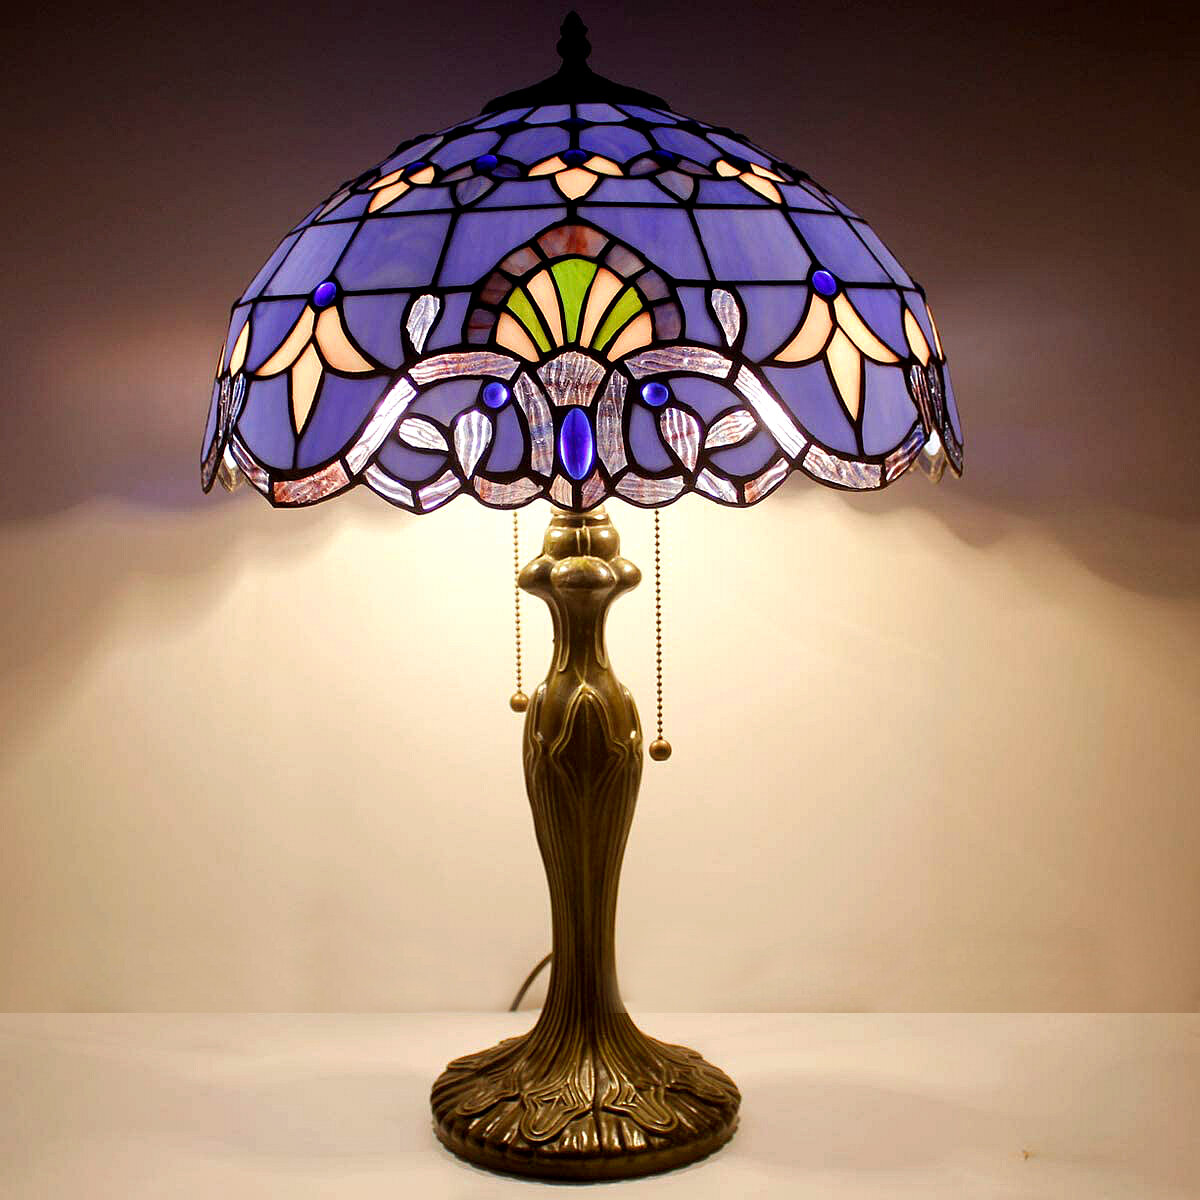 Bloomsbury Market Tiffany Lamp Table Bedside Lamp Stained Glass Shade Metal  Base 24"Tall Large Desk Light Blue Purple Baroque Lavender Luxurious Boho  Victorian Living Room Bedroom Farmhouse Bloomsbury Market Led Bulb Included  |